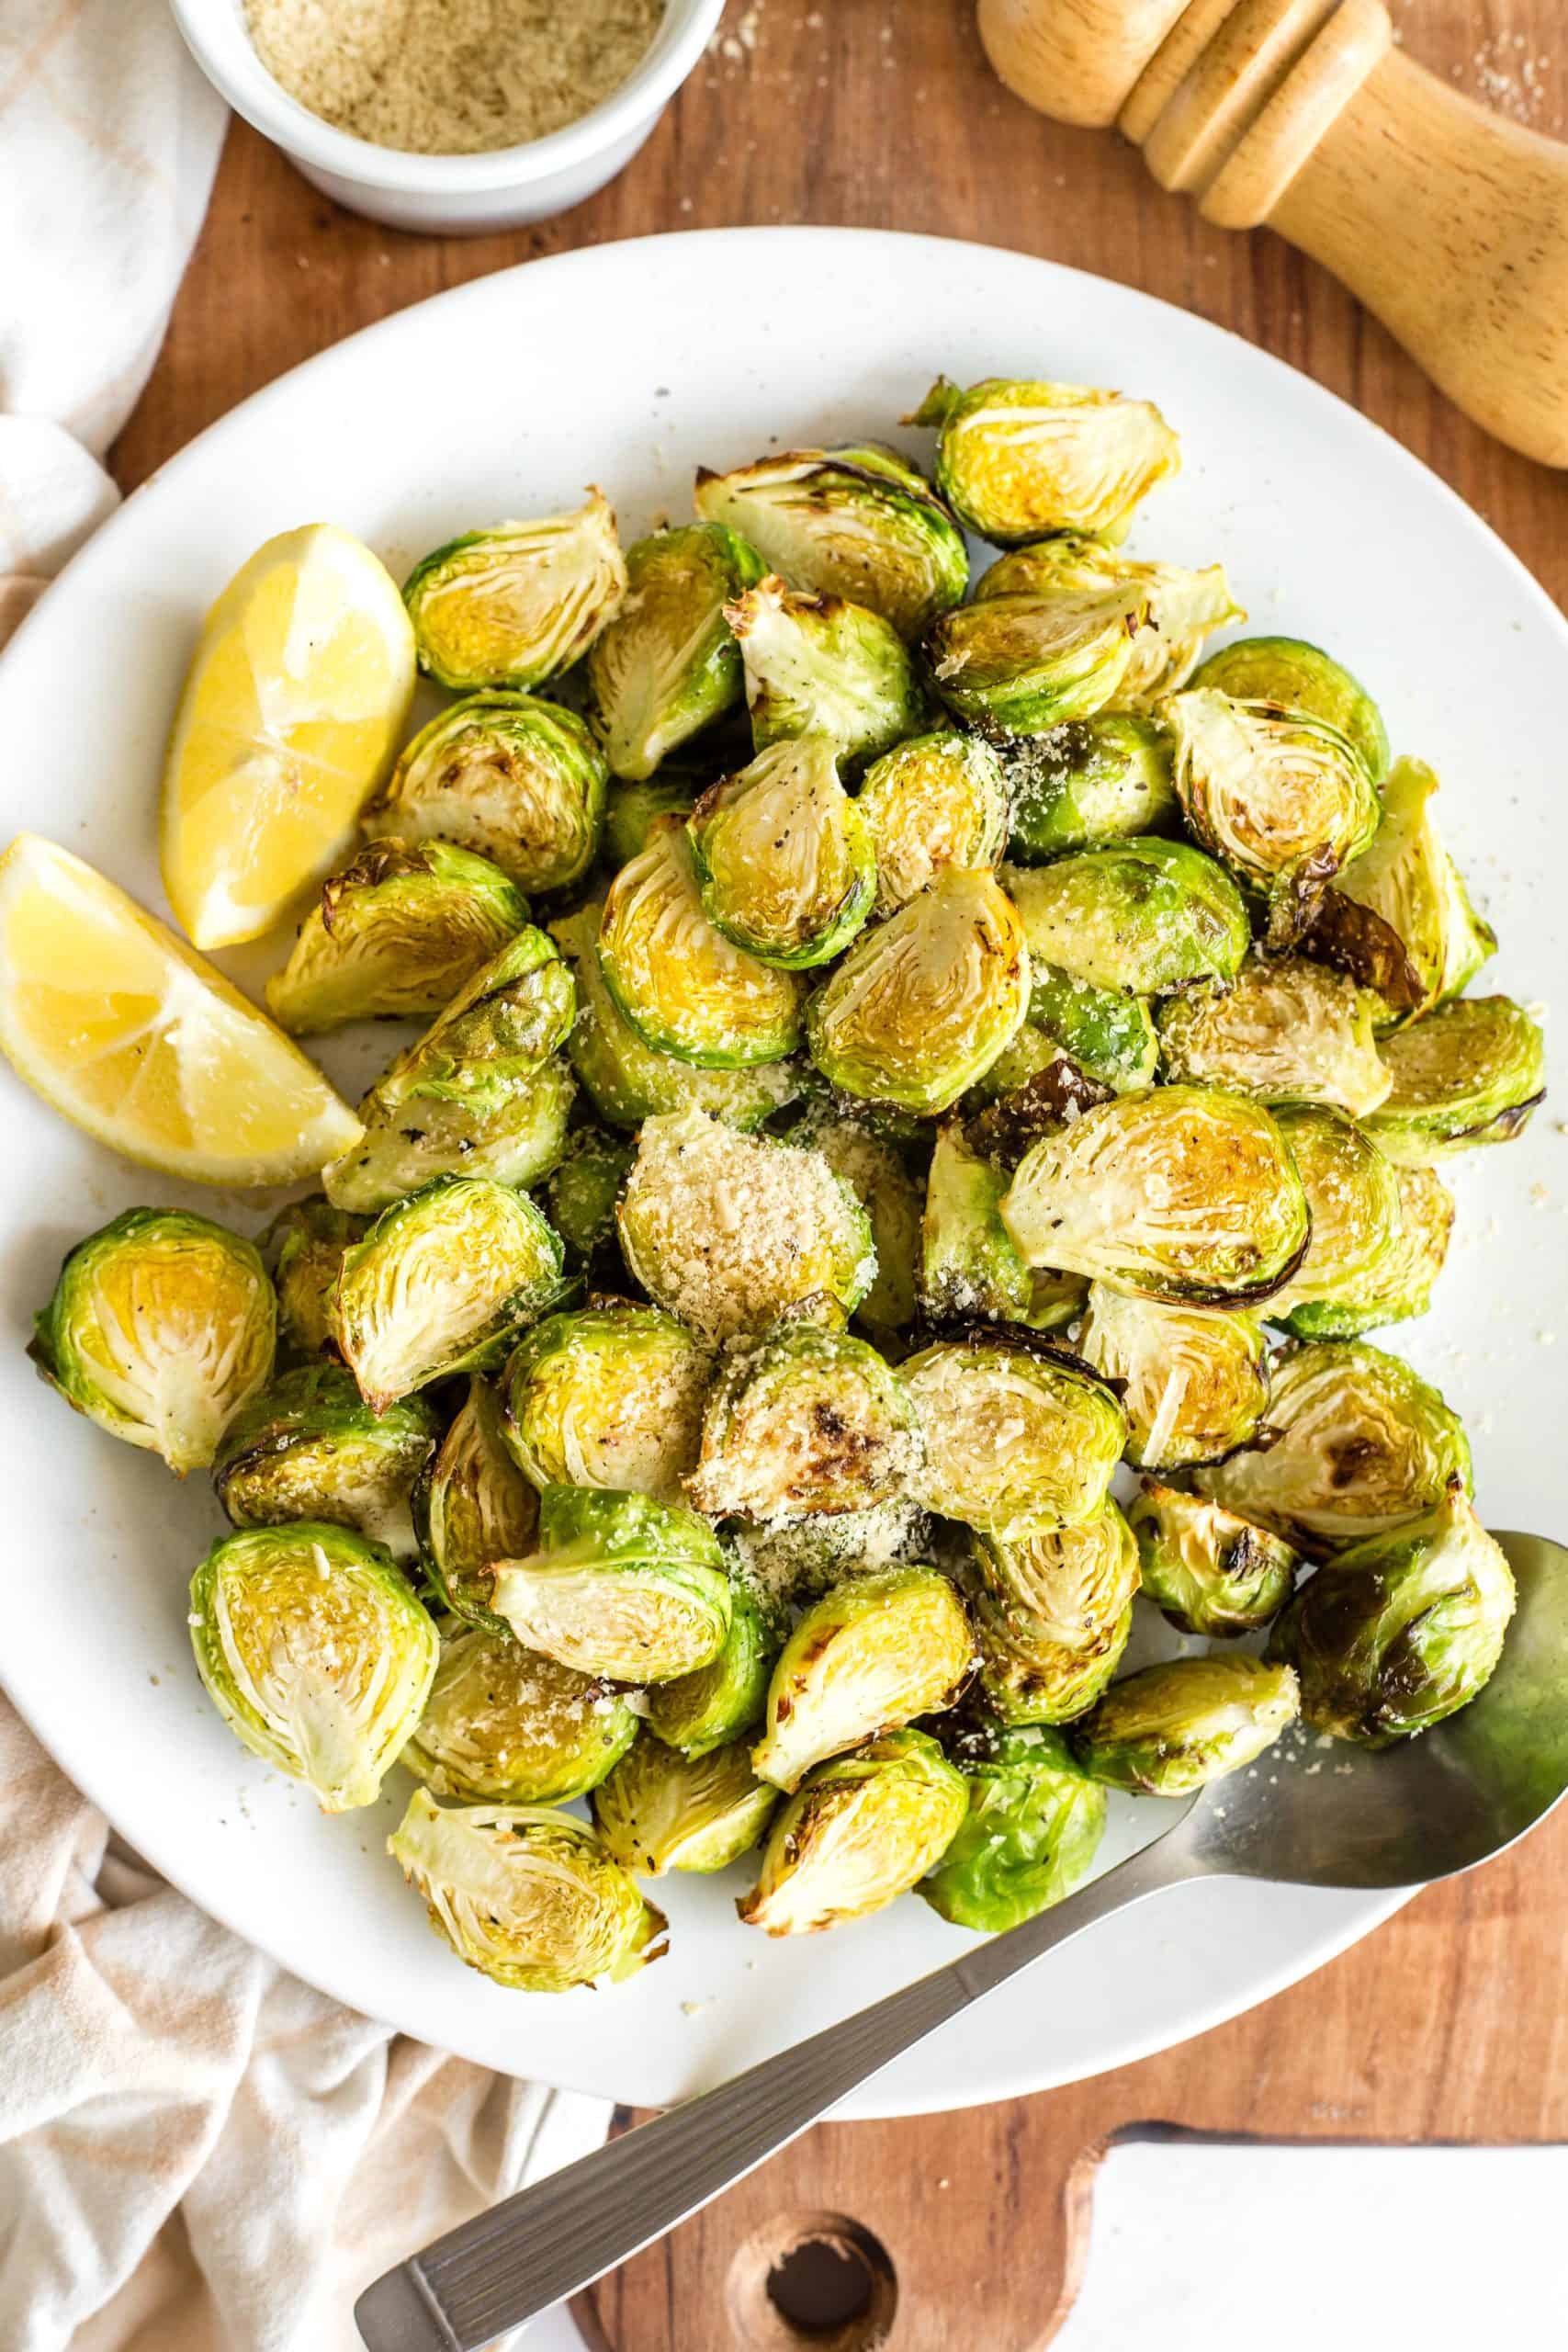 A plate of crispy Brussels sprouts on a wooden board.